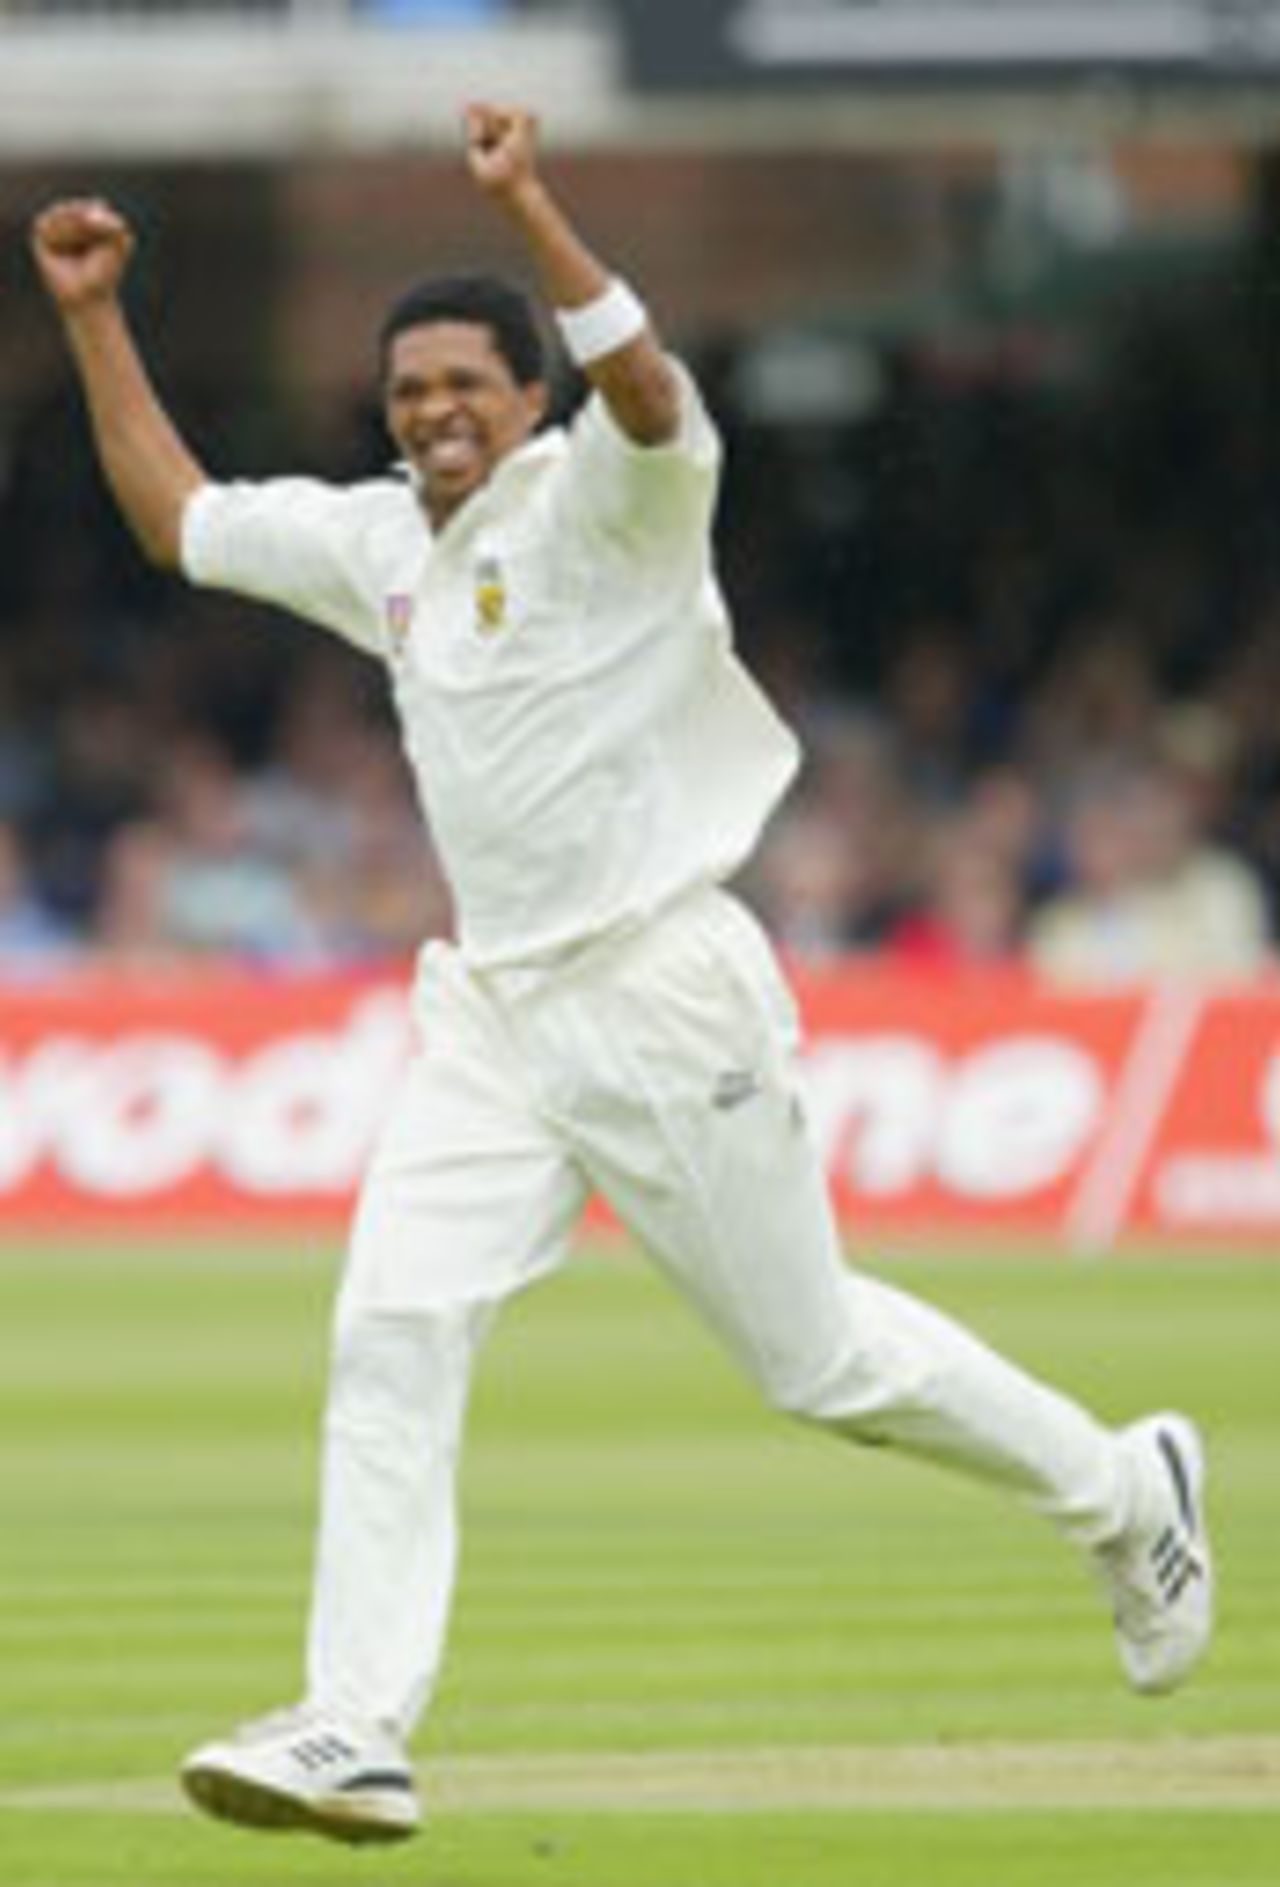 Makhaya Ntini celebrates a wicket in his 5 for 75 v Eng at Lord's 2003